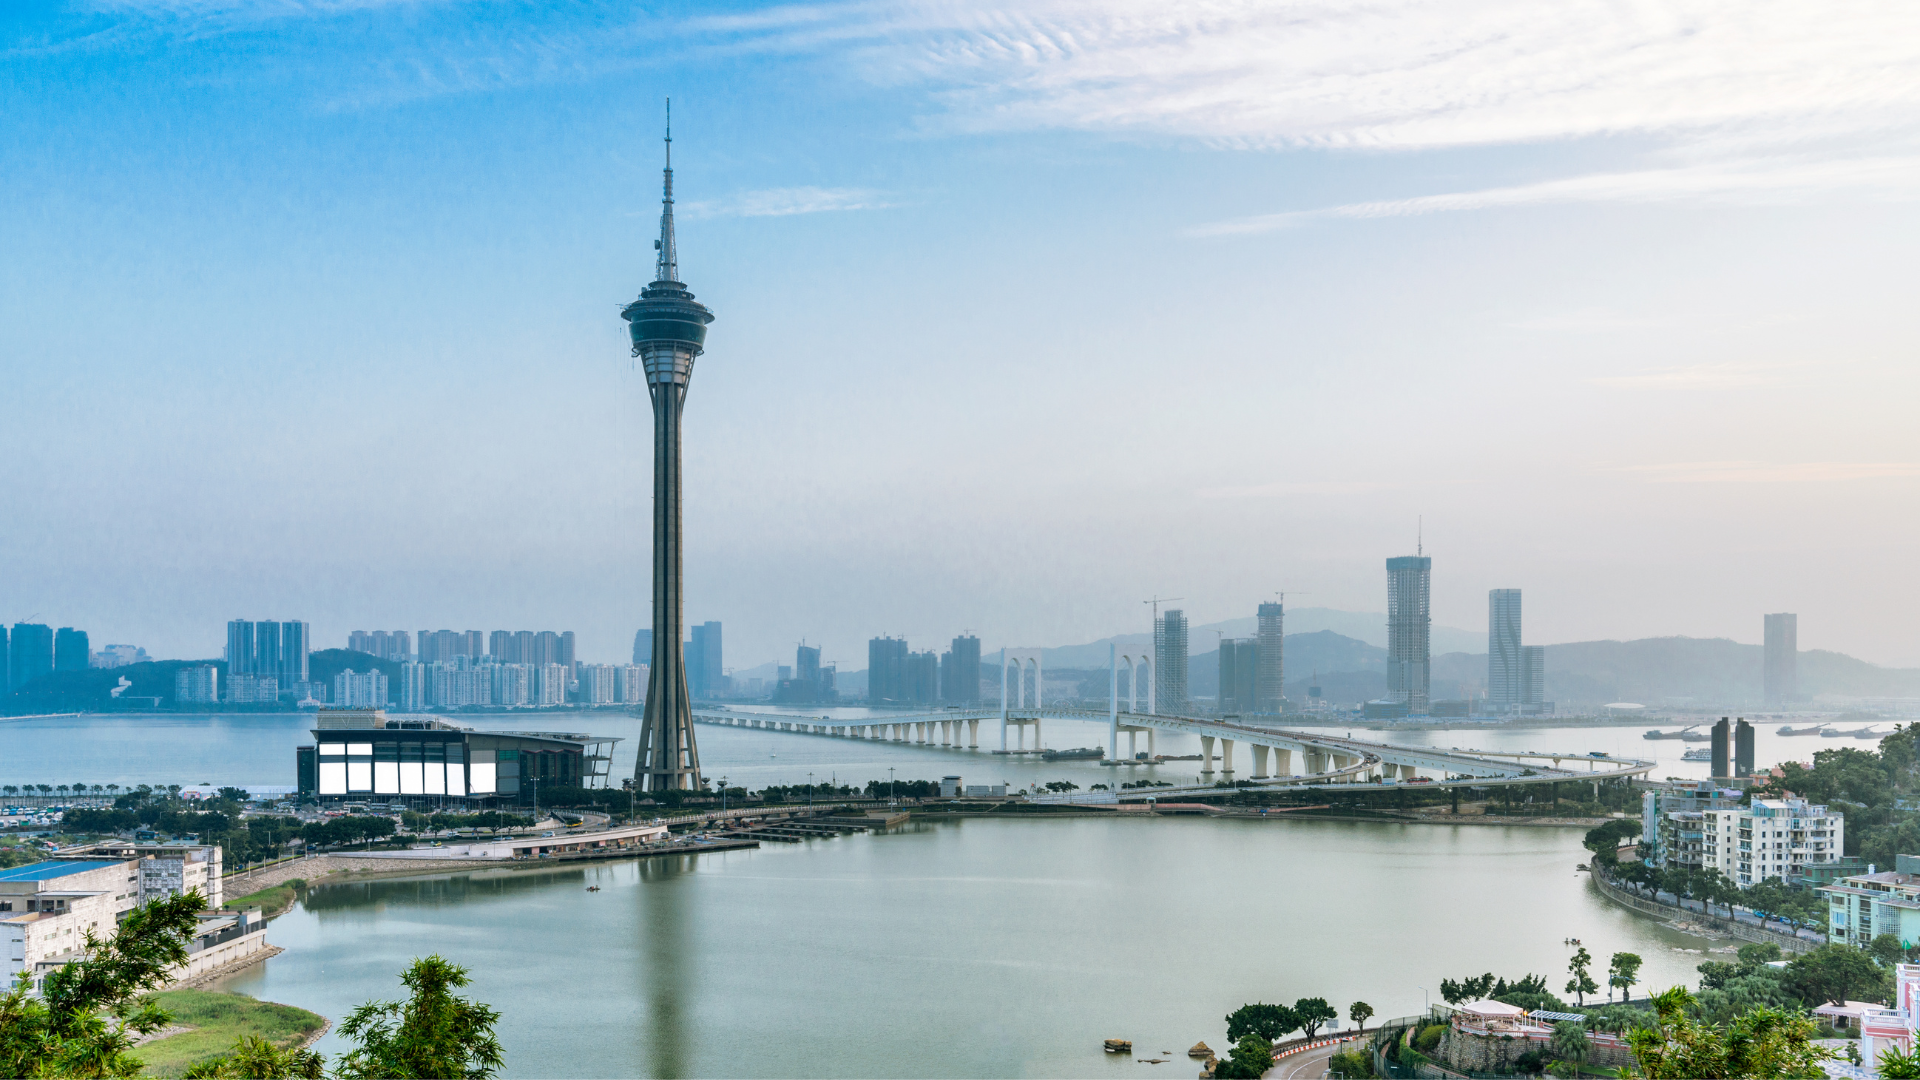 MICE events to boost Macao’s economic recovery